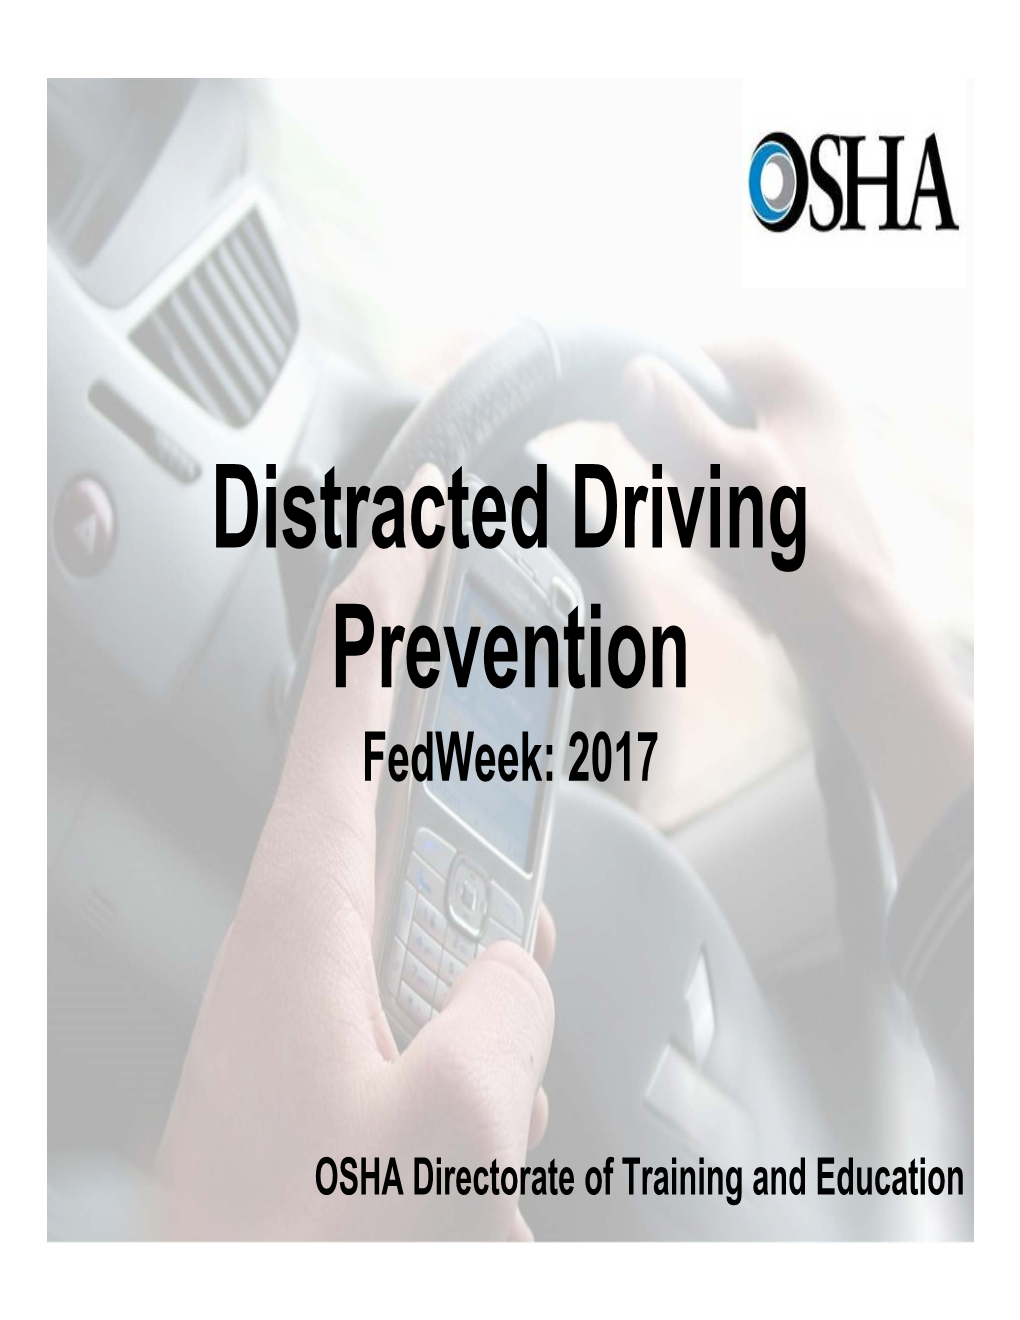 Distracted Driving Prevention Fedweek: 2017